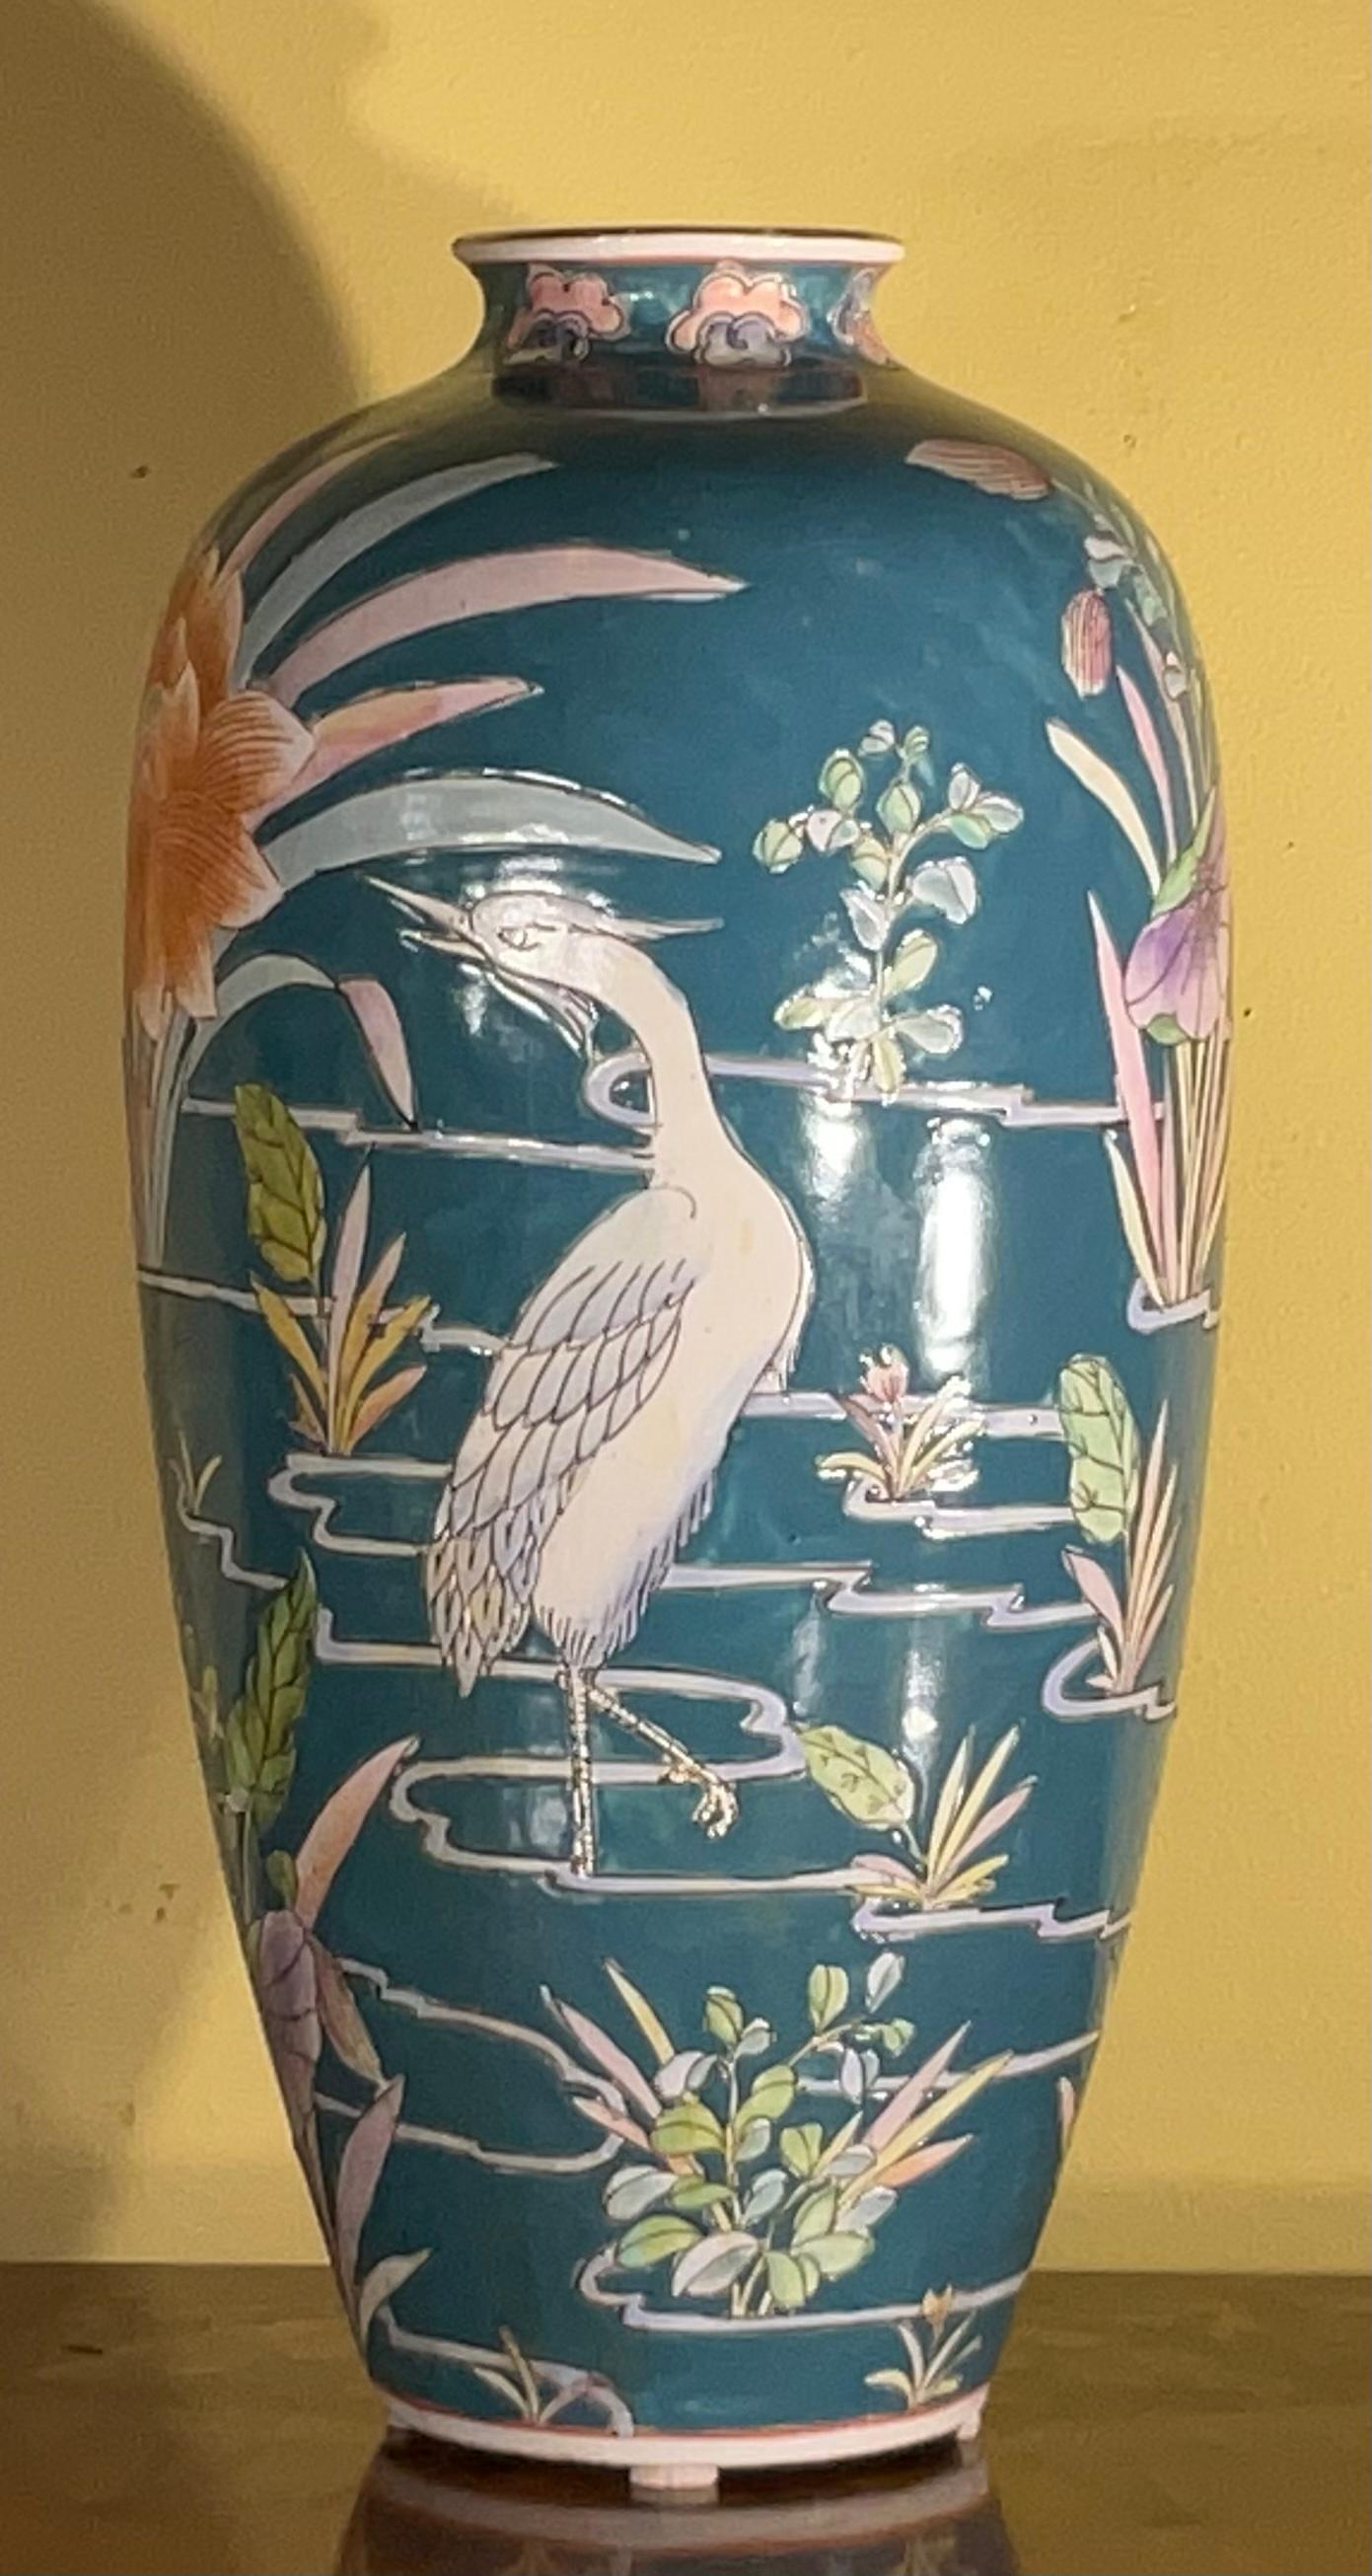 Elegant Chinese vase hand painted with classical Chinese motifs of garden and birds, beautiful vivid details, exceptional colors.
Opening is 2”25.